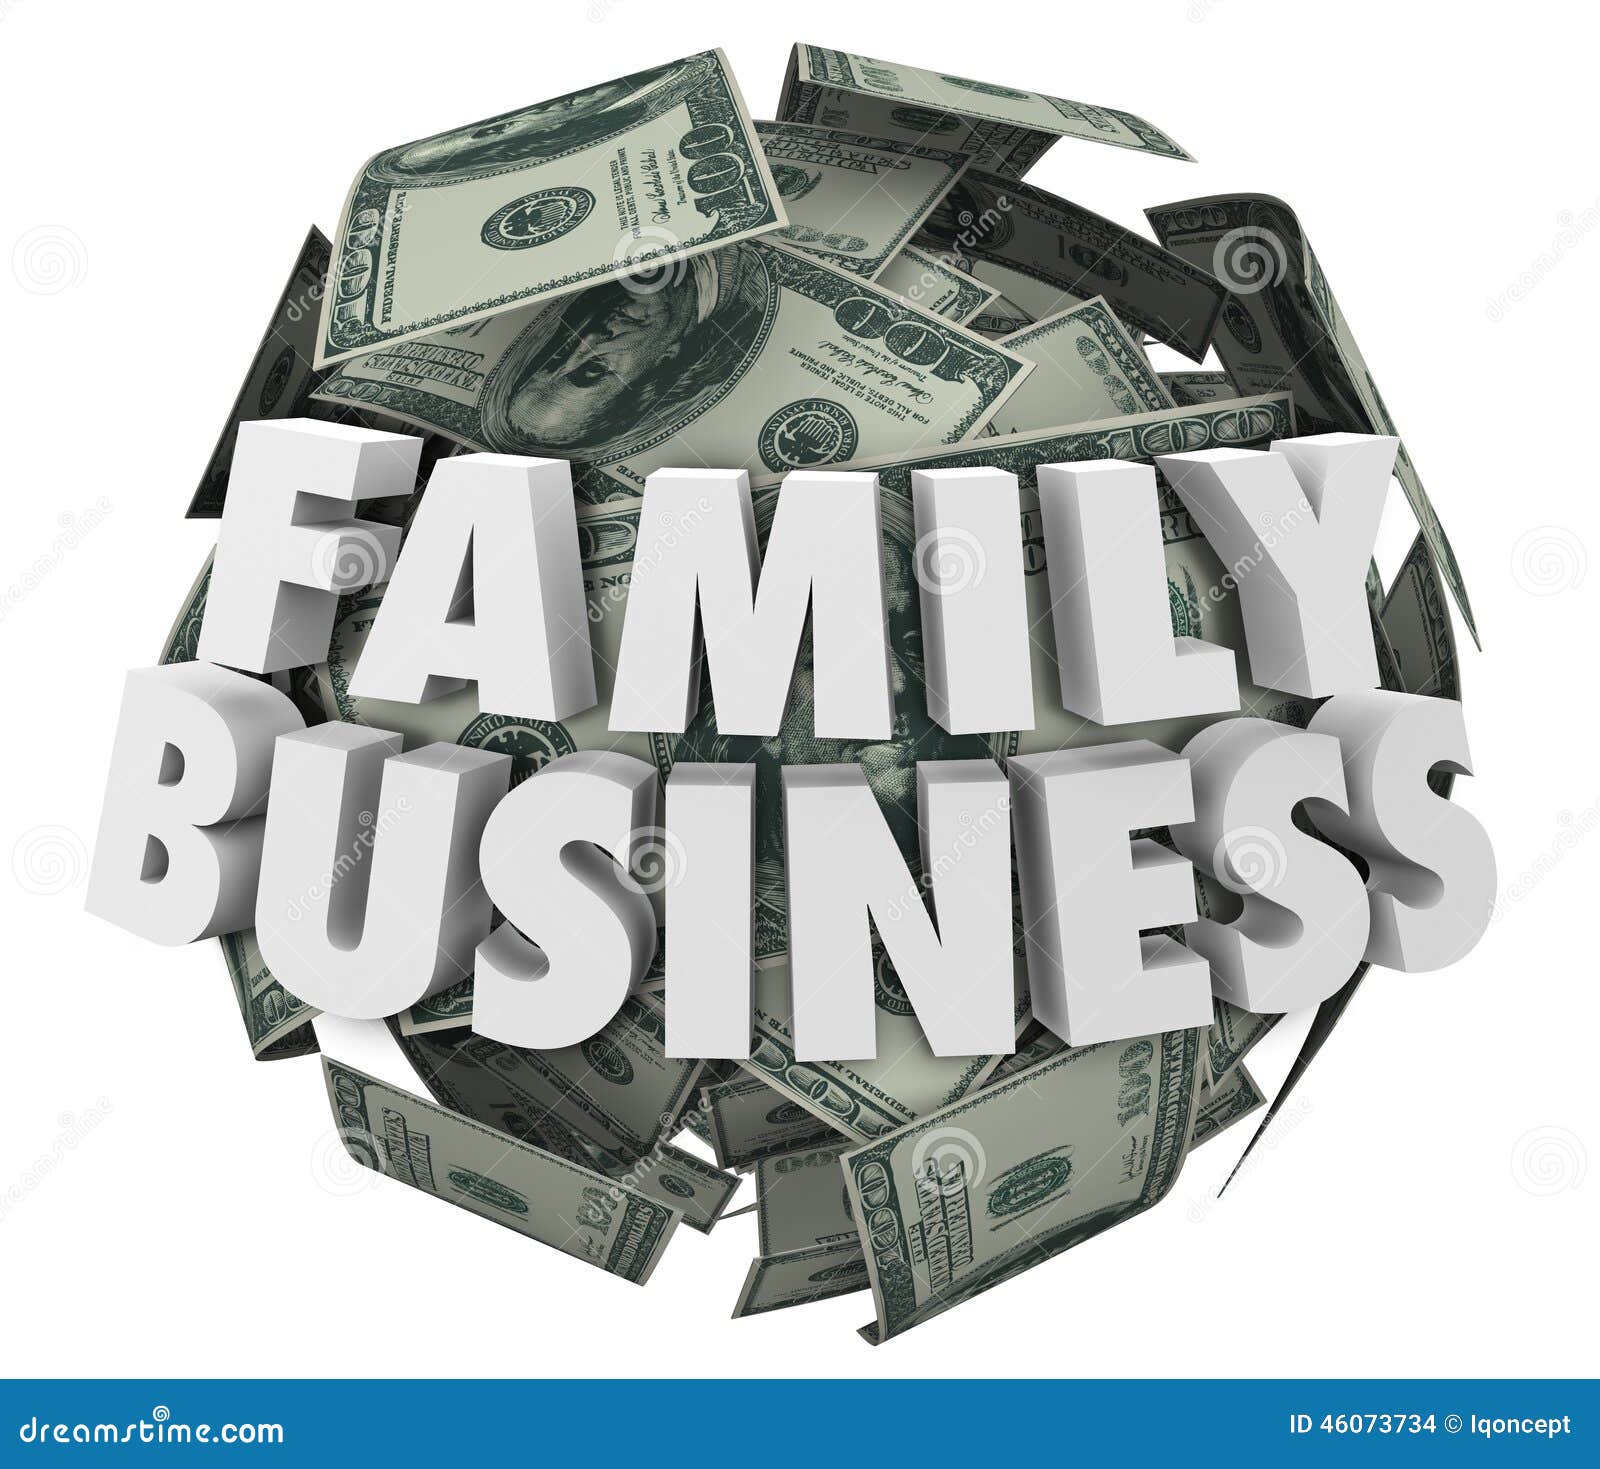 family business clipart - photo #35